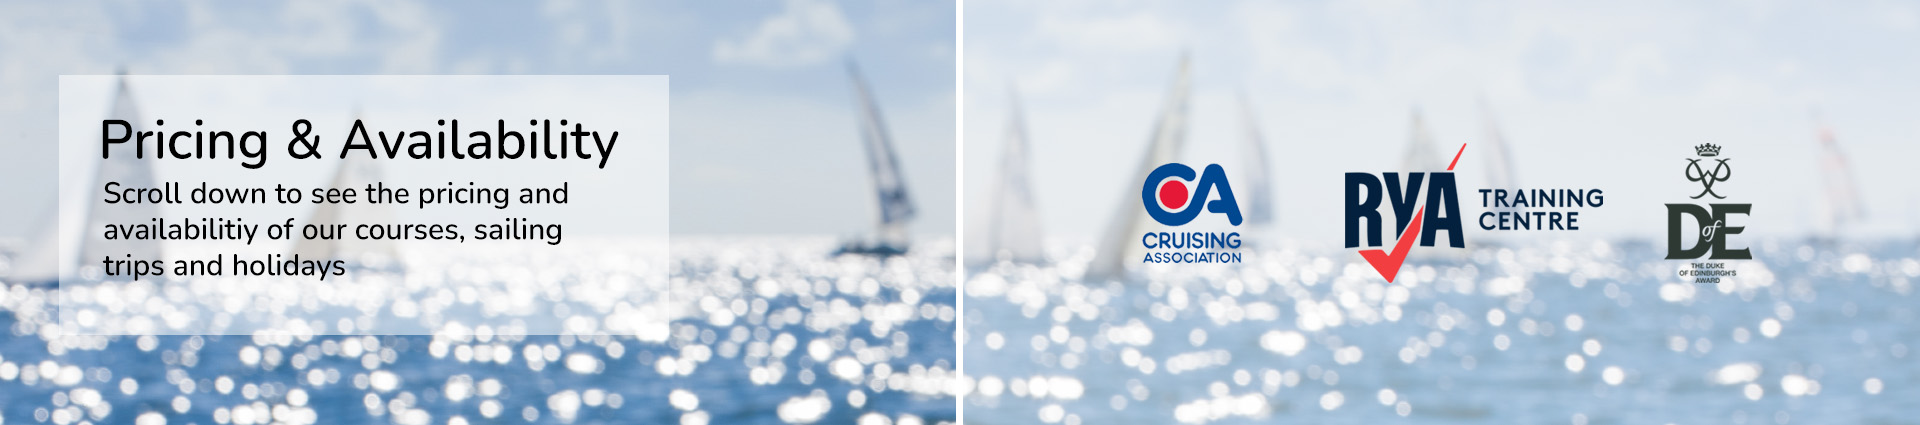 RYA Sailing Courses in London and the Solent and Sailing Holidays